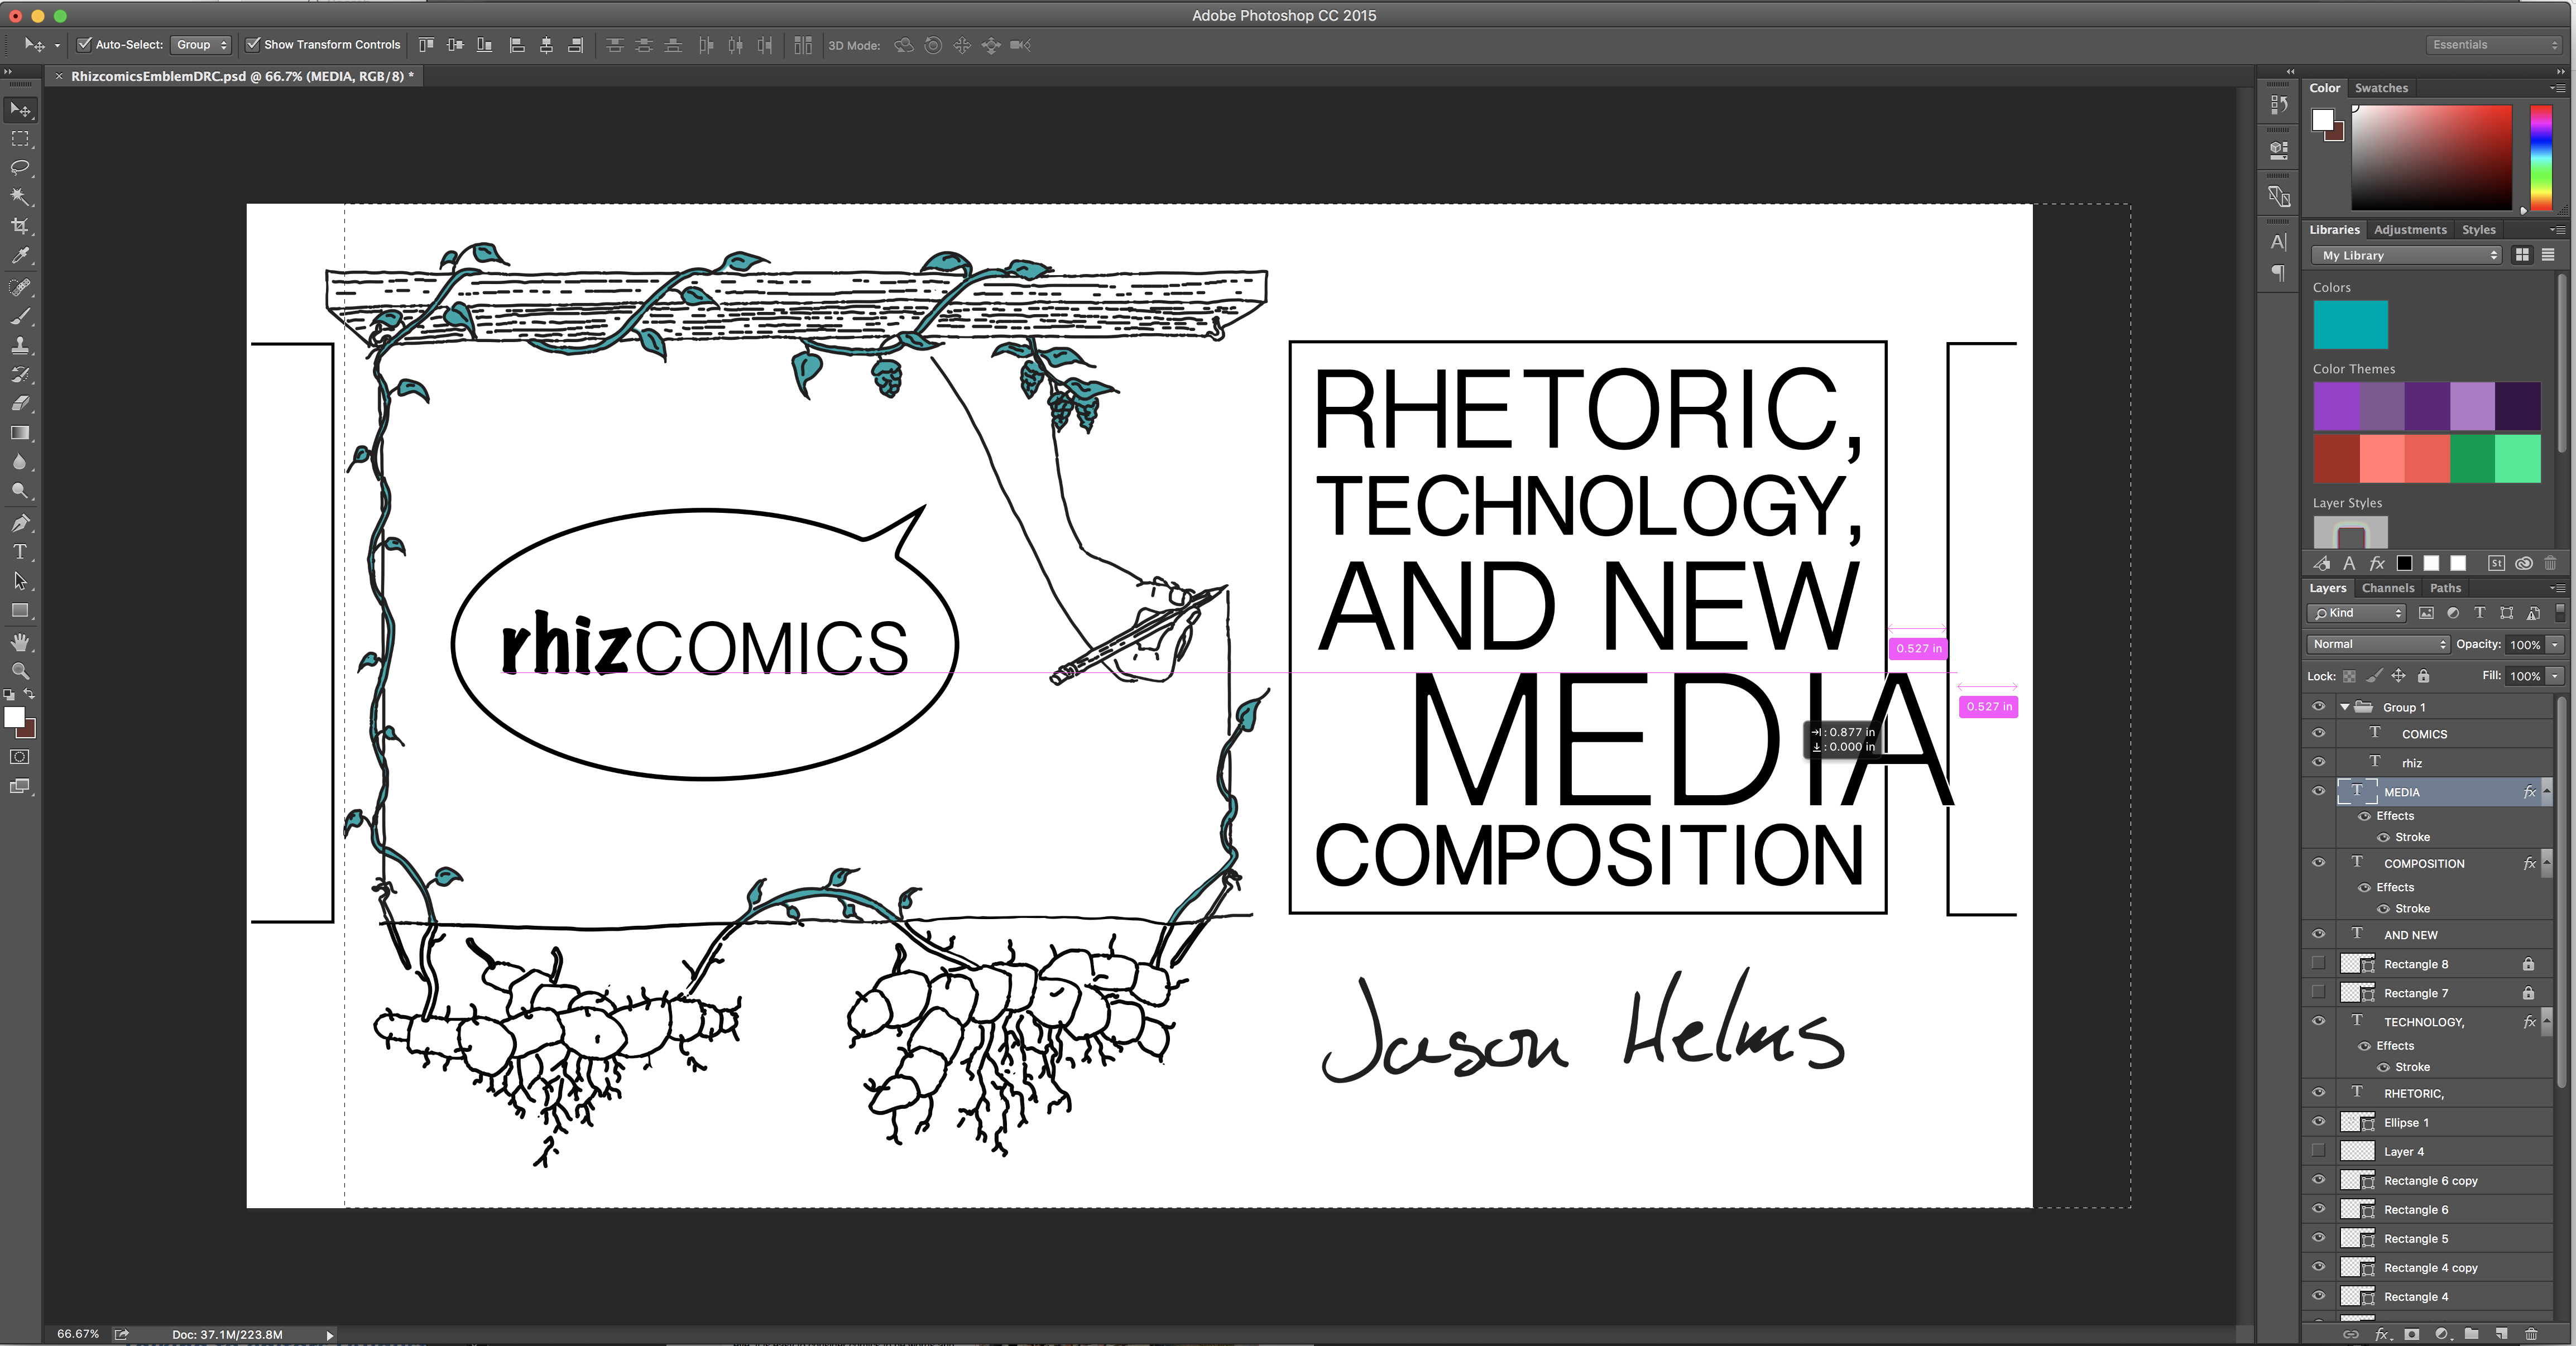 Adobe Photoshop editing workspace showing a hand-drawn trellis, vines, roots, and the author Jason Helms' name, and the typed title Rhizcomics: Rhetoric, Technology, and New Media Composition